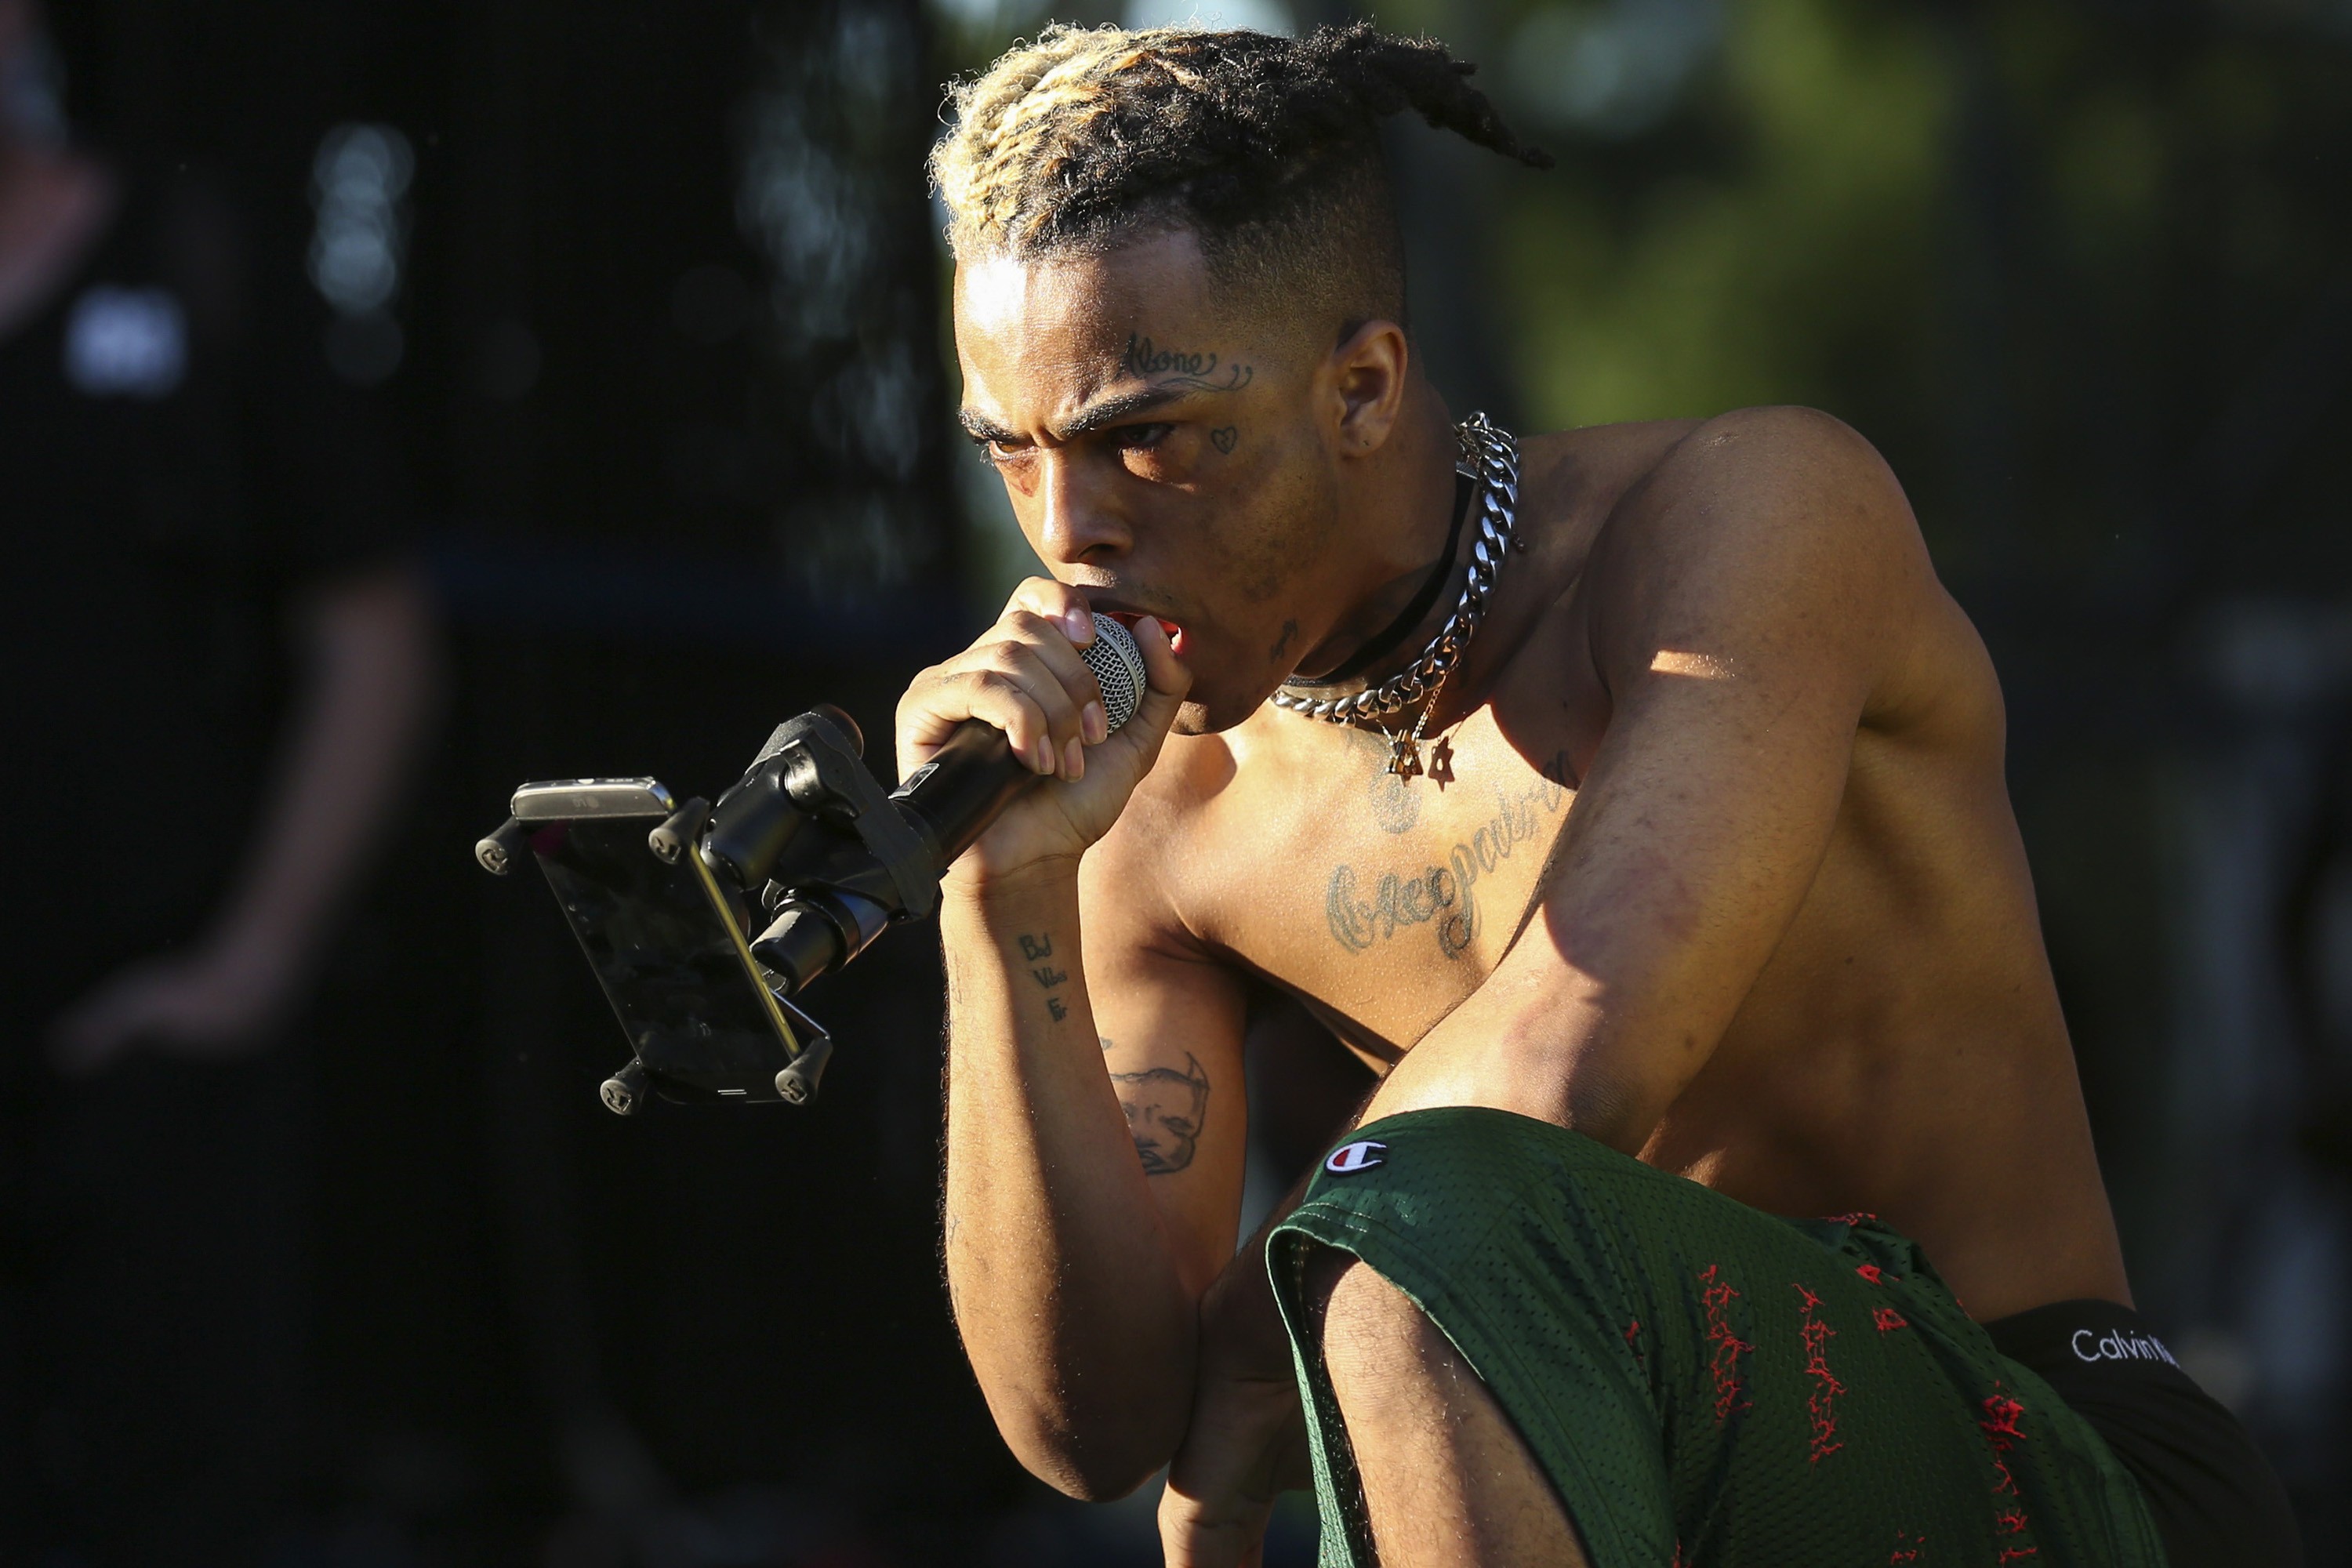 Chart-topping XXXTentacion is shot dead at 20, after a fast and violent rise to fame | South China Morning Post